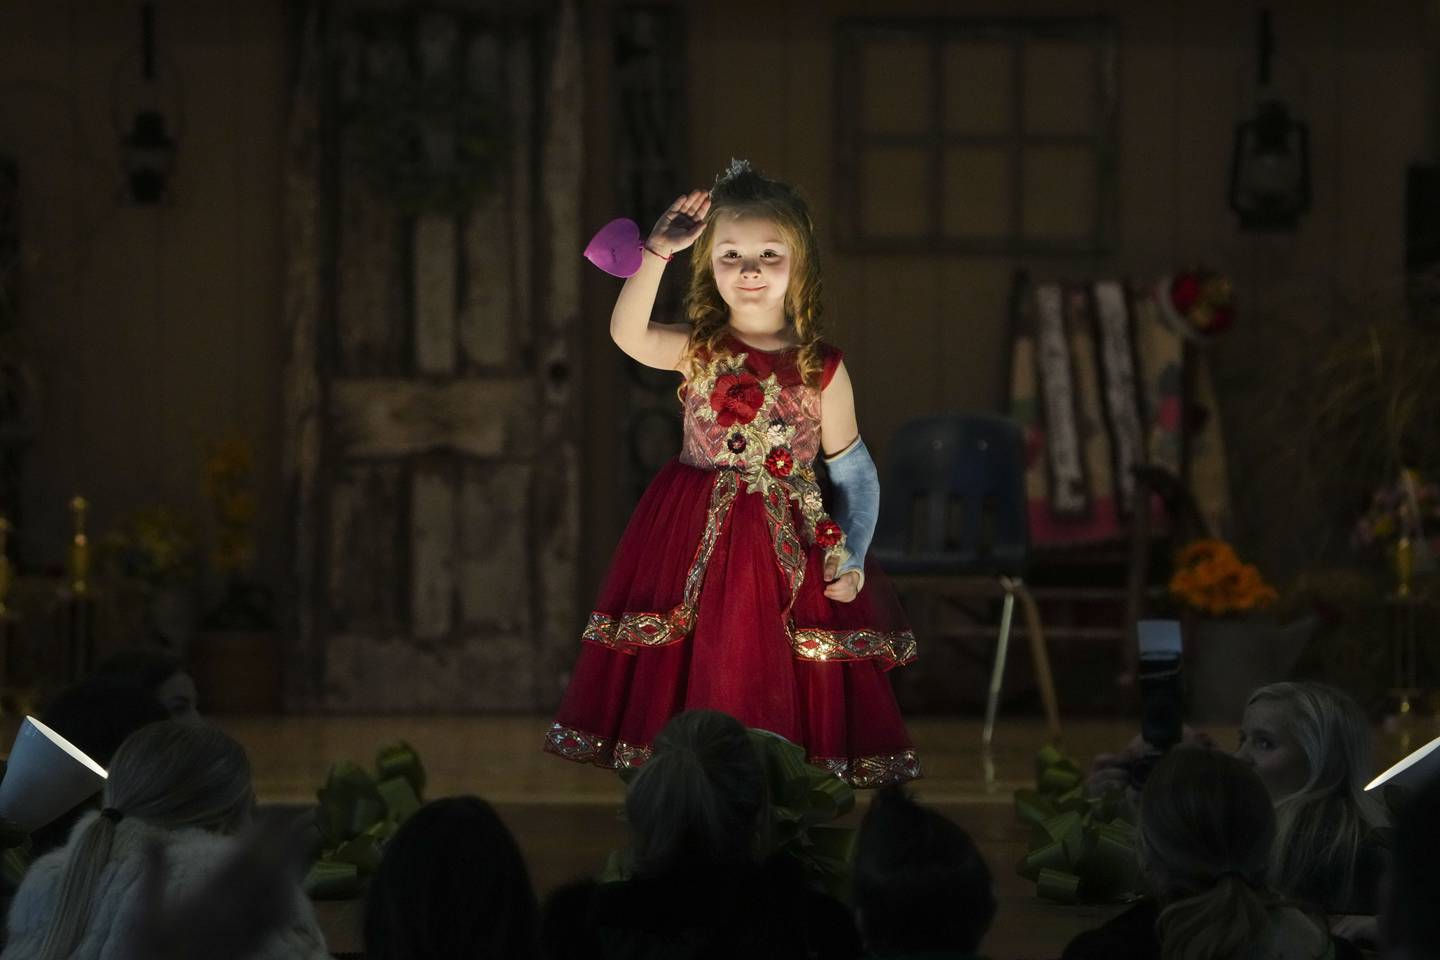 Rose Bloodsworth, 5, participates in the Little Miss Outdoors pageant with a broken arm.